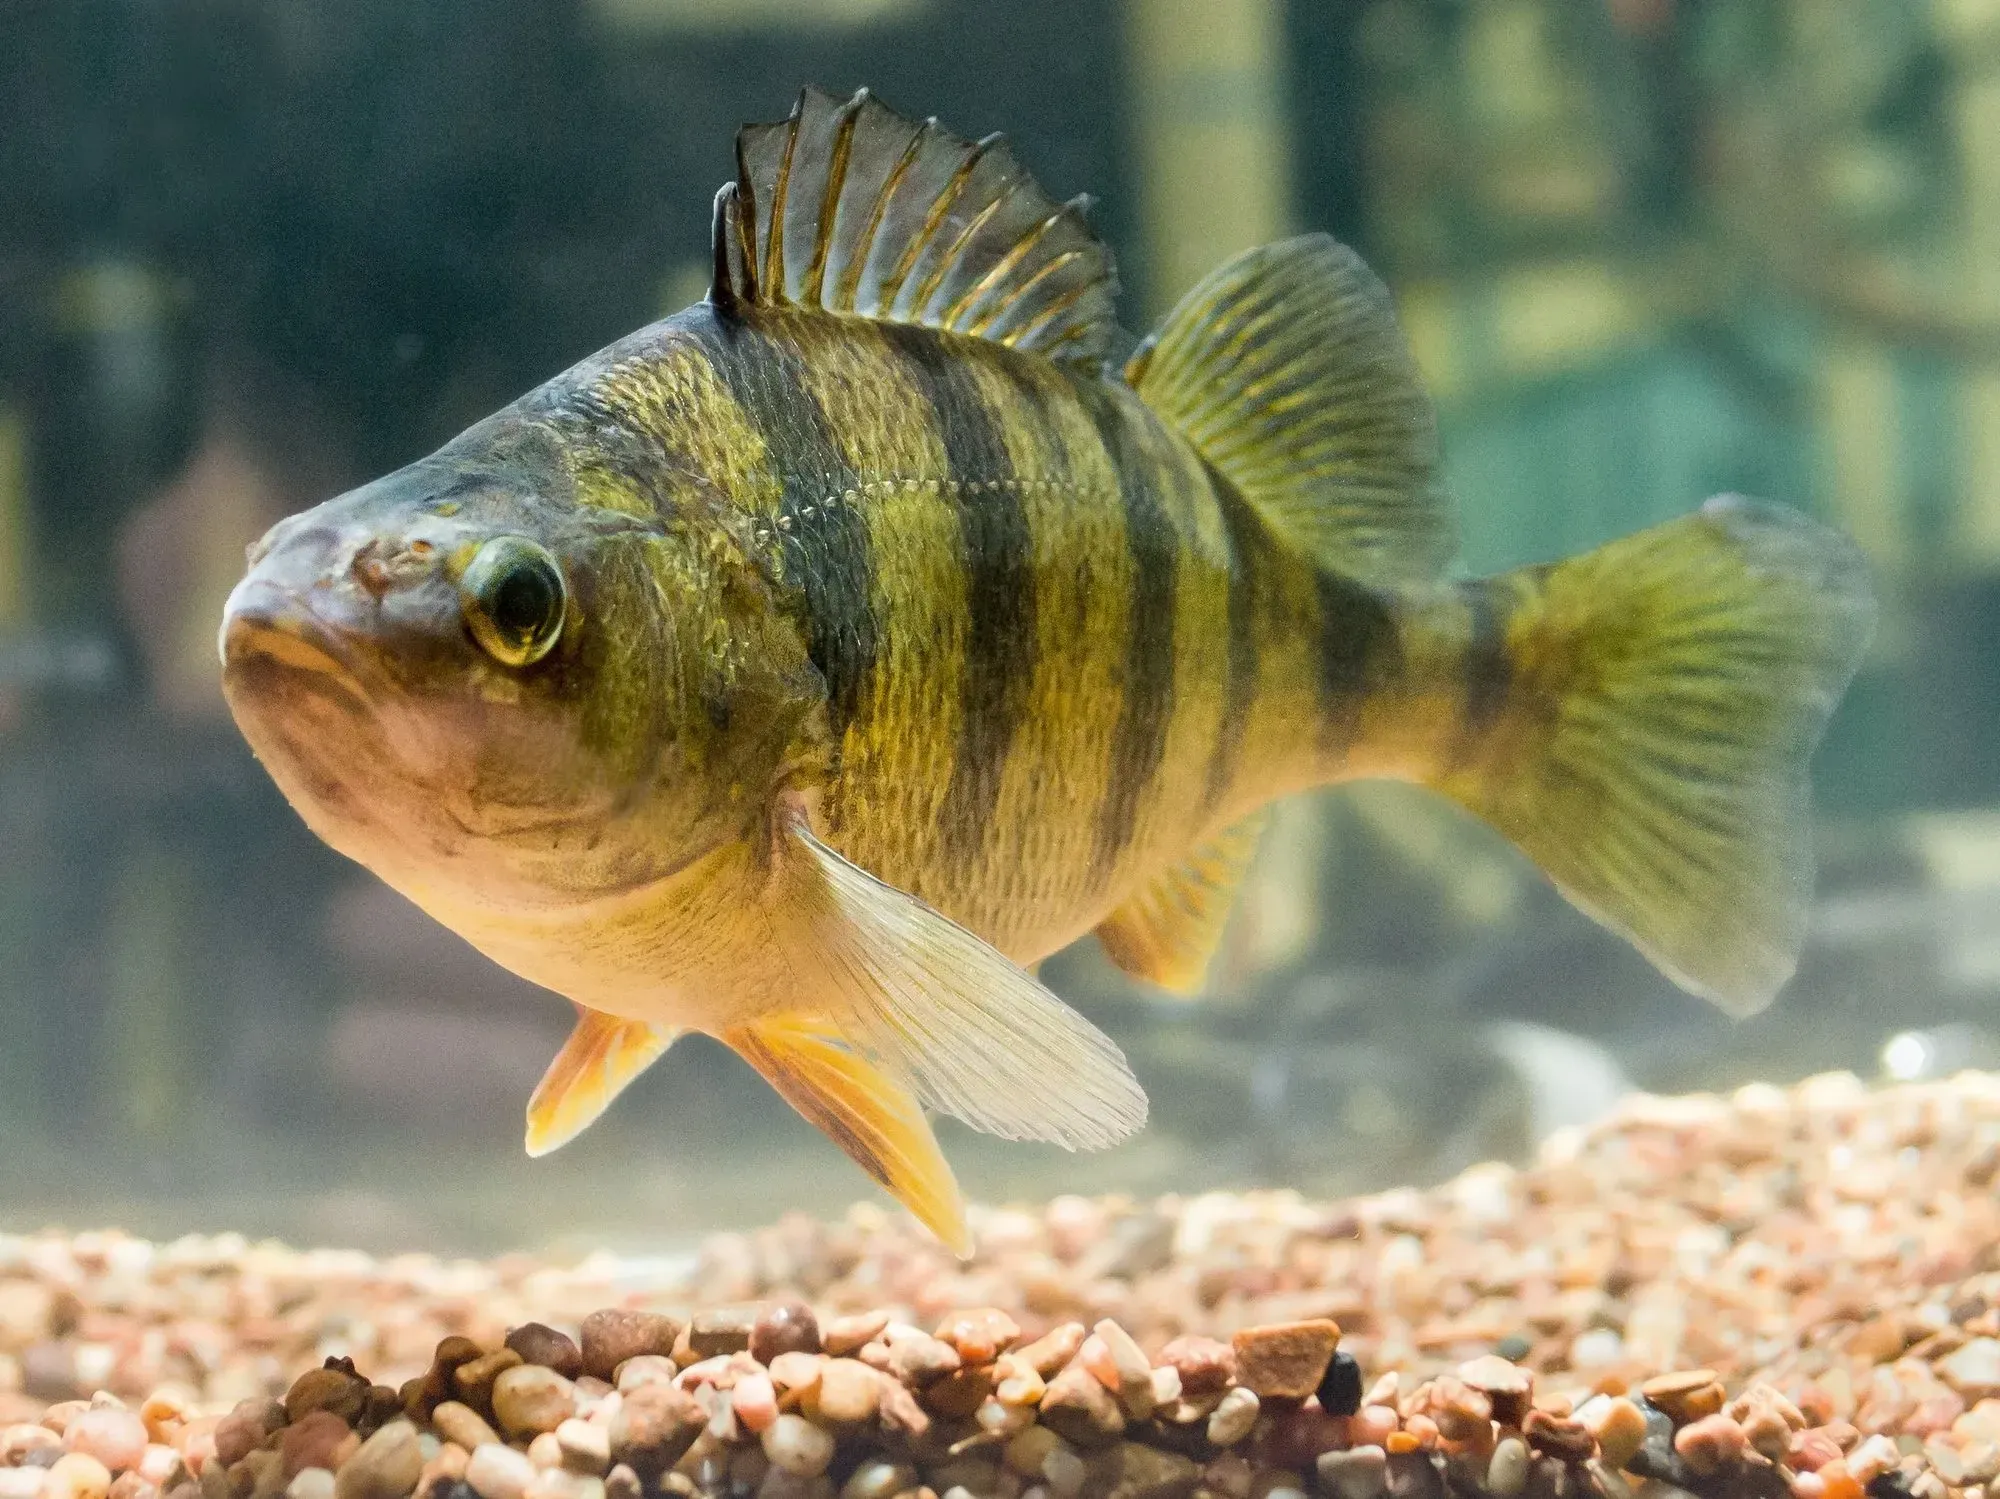 Chinese perch is a medium size fish with a compressed body and a protruding jaw.